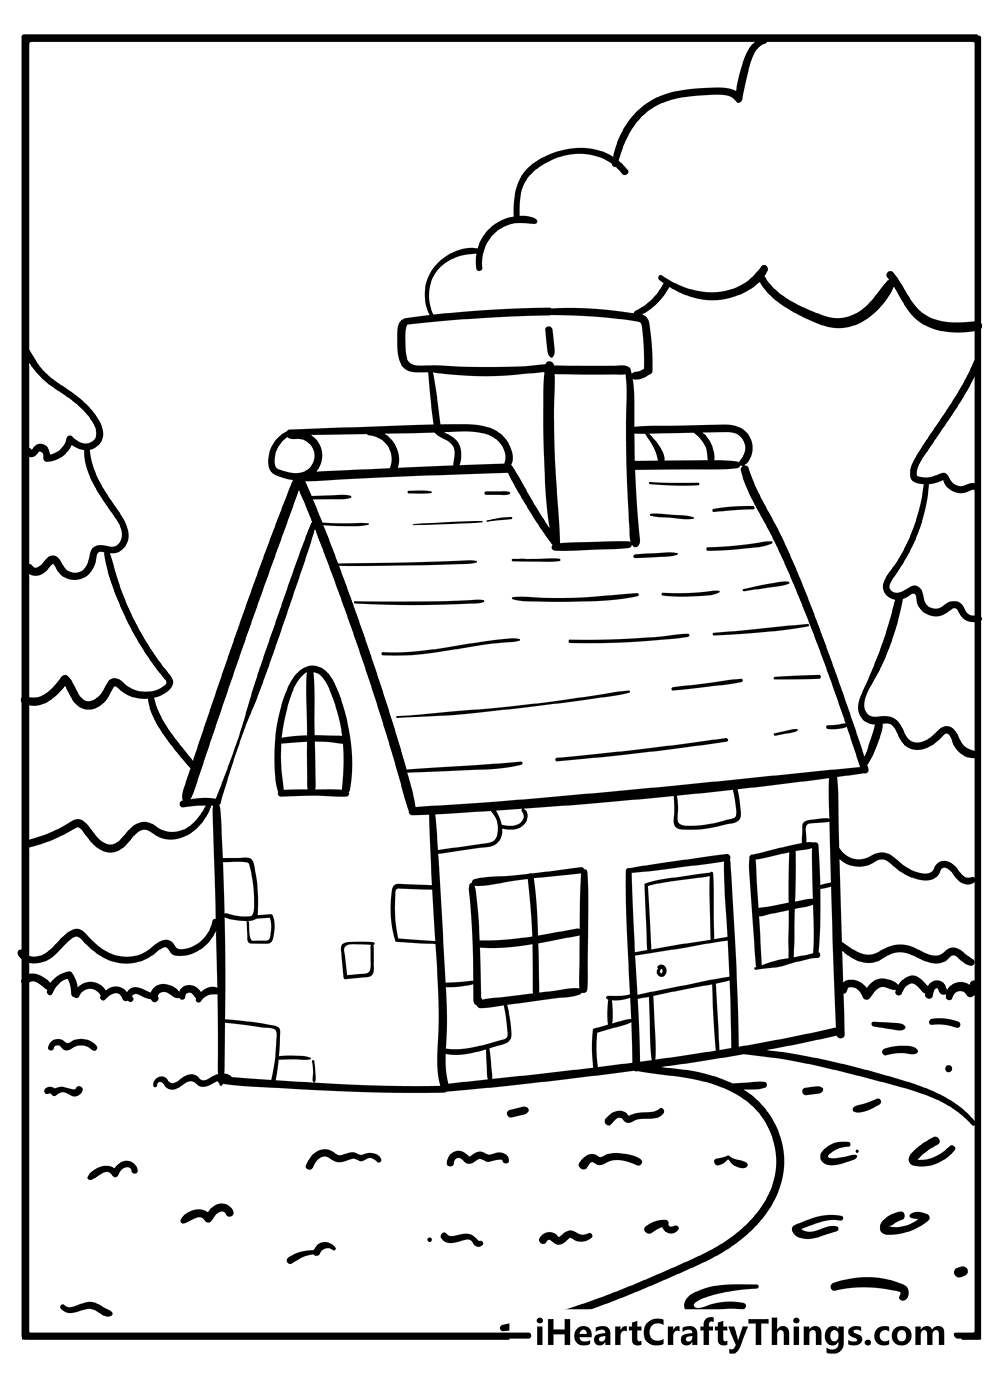 House Coloring Sheet for children free download